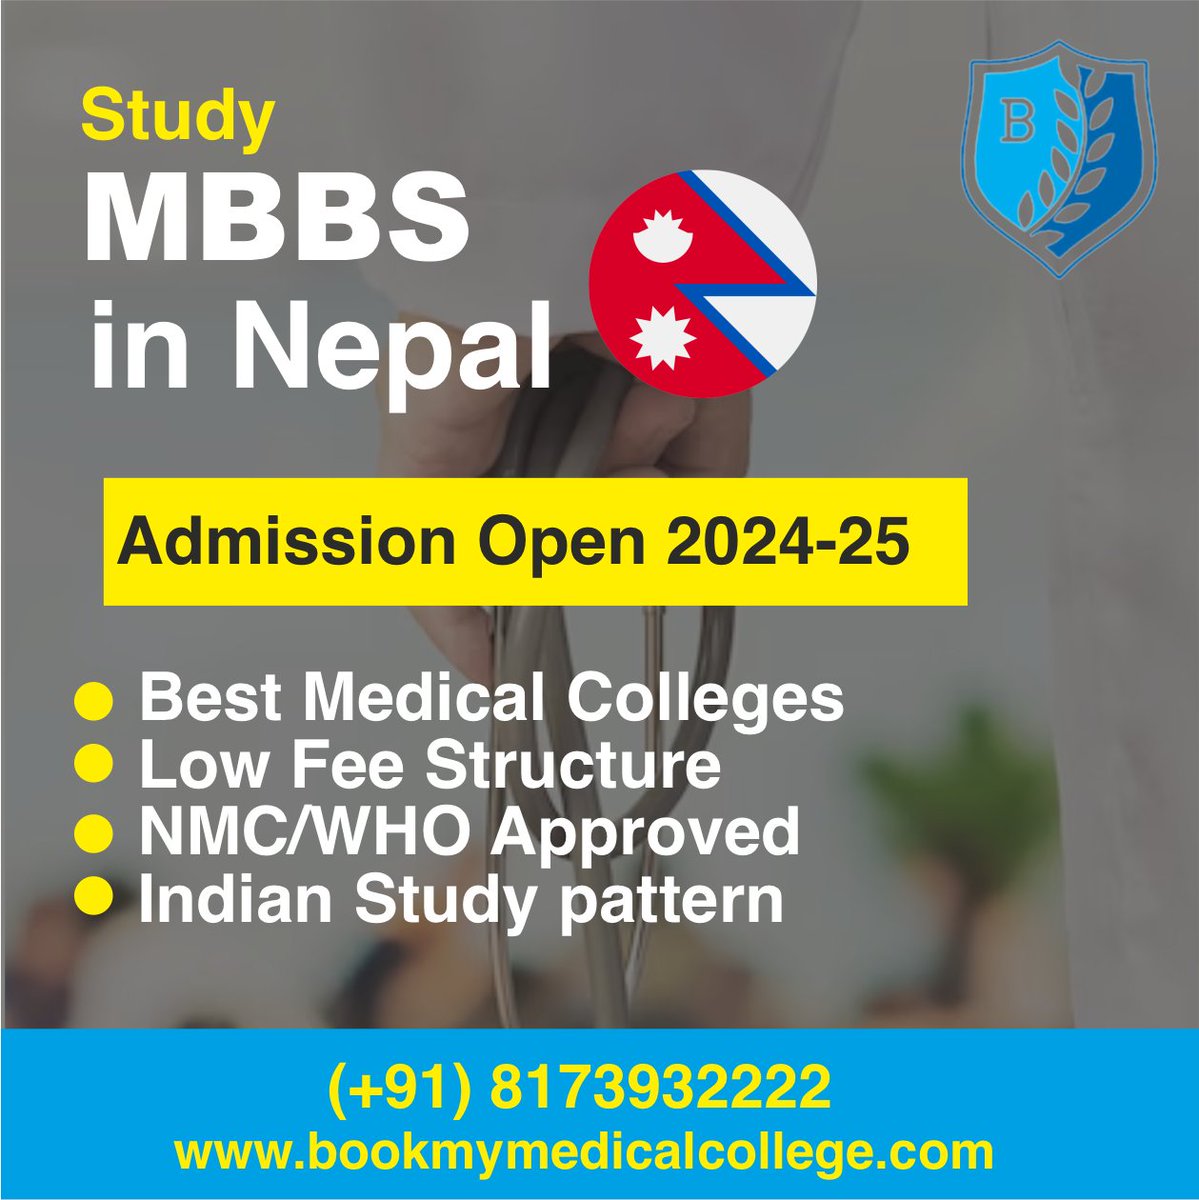 Nepal is one of the preferred medical education destination when it comes to study abroad. Know about top MBBS colleges, eligibility criteria, fee structure and admission process @ bookmymedicalcollege.com/study-mbbs-nep…

#MBBSAdmission2024 #studyabroad #MBBSabroad #medicalschool #studyinNepal